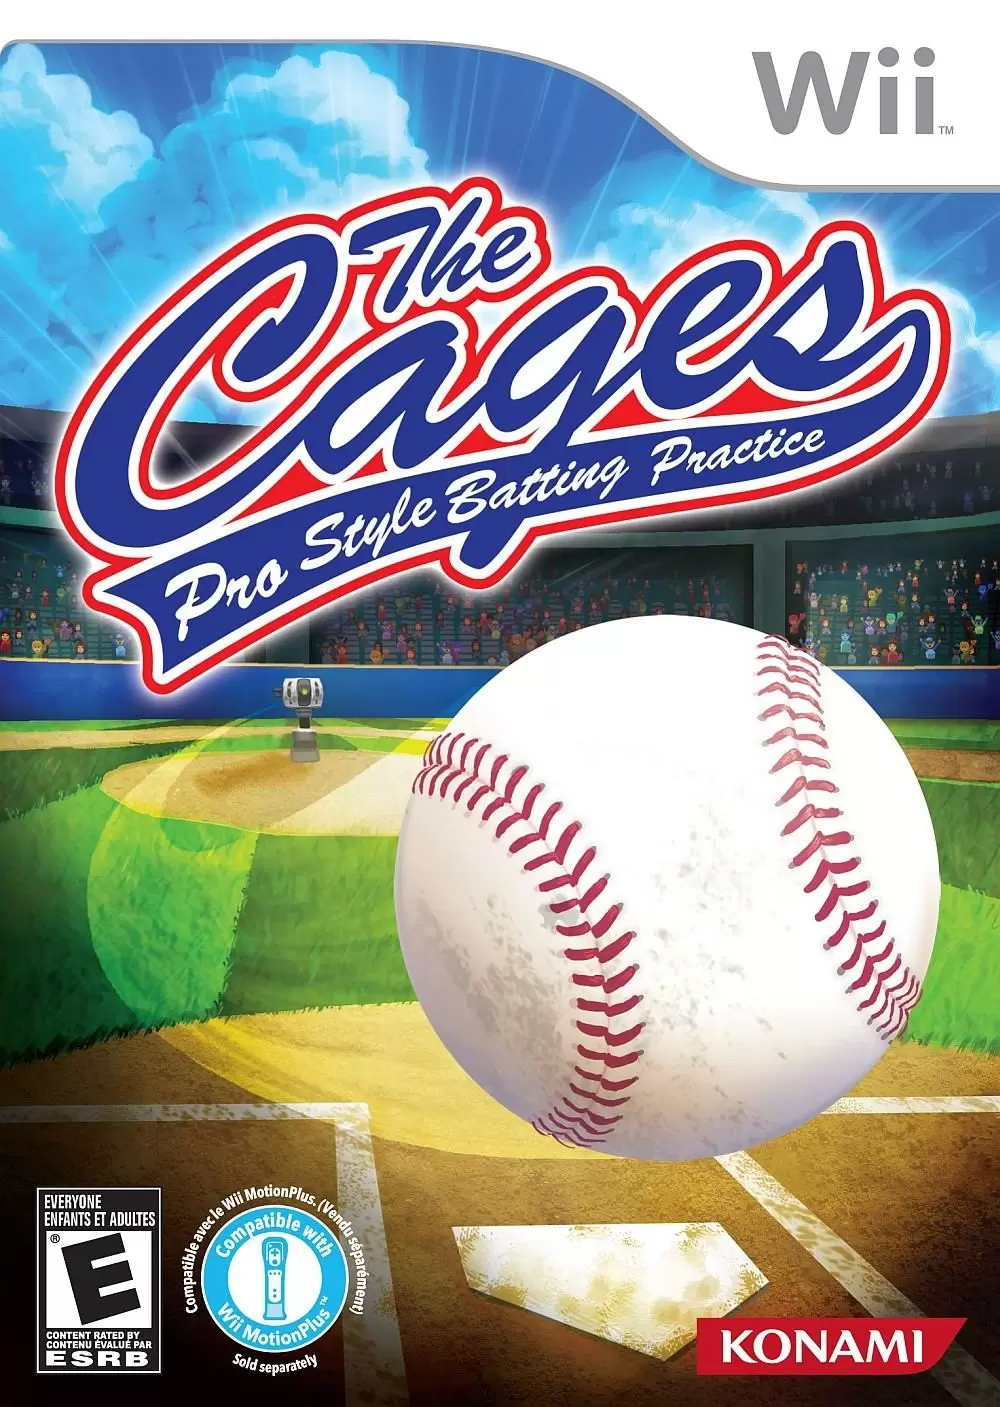 Jeux Nintendo Wii - The Cages: Pro Style Batting Practice